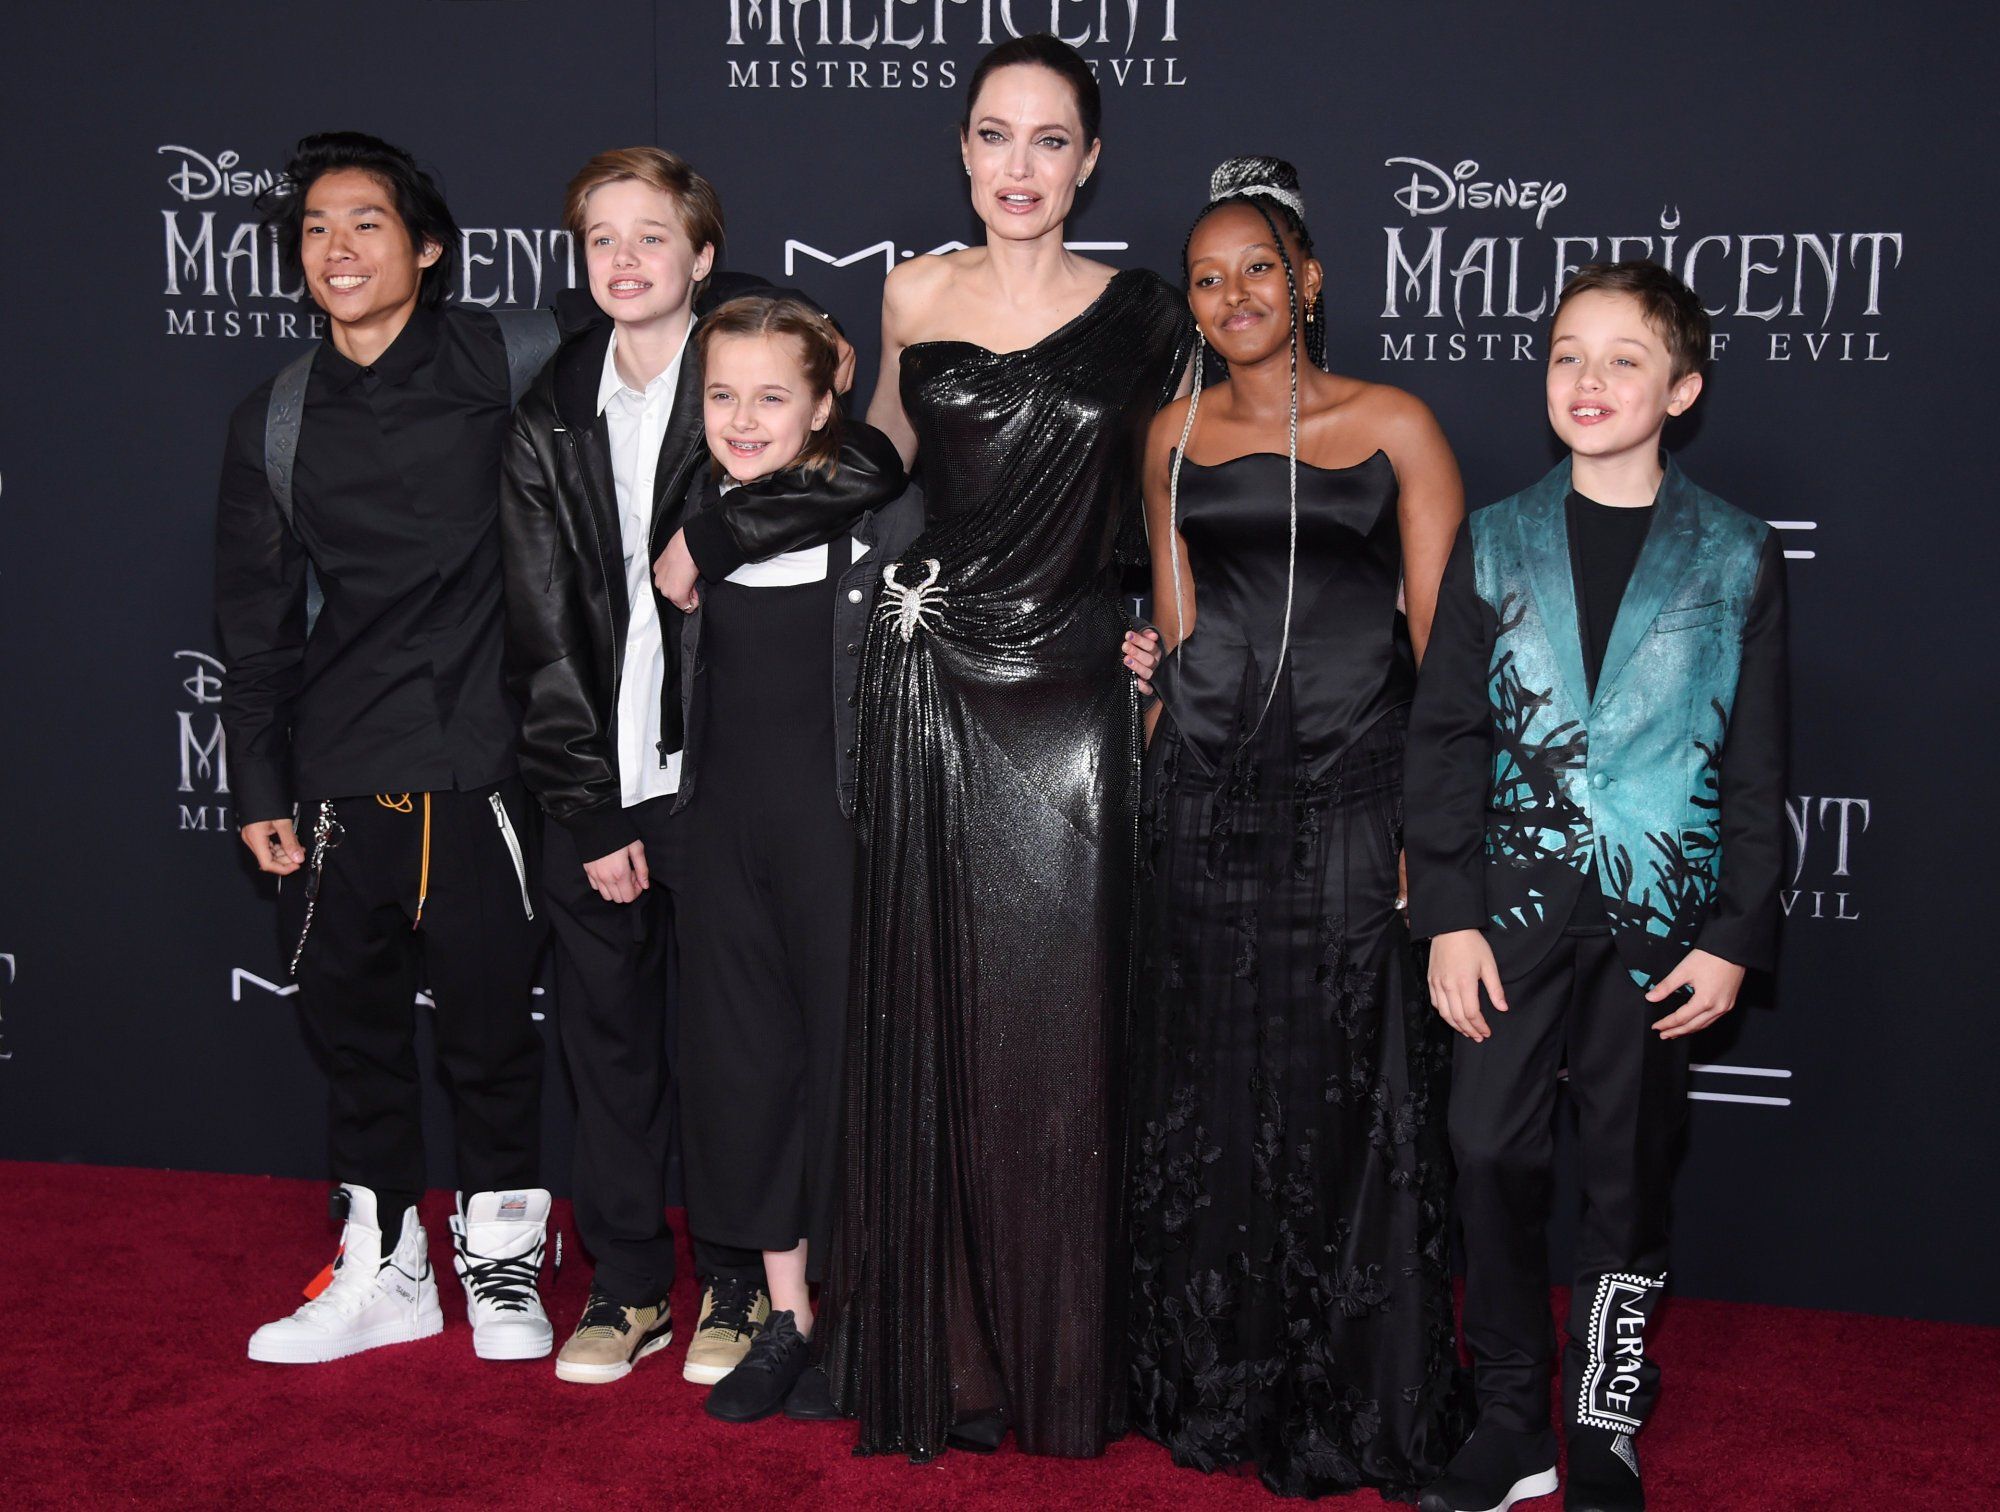 The Jolie Pitts In 2021: Shiloh's Teen Transformation, Maddox In South Korea, Zahara The Philanthropist And More Amazing Before And Afters Of Brangelina's Multicultural Brood. South China Morning Post